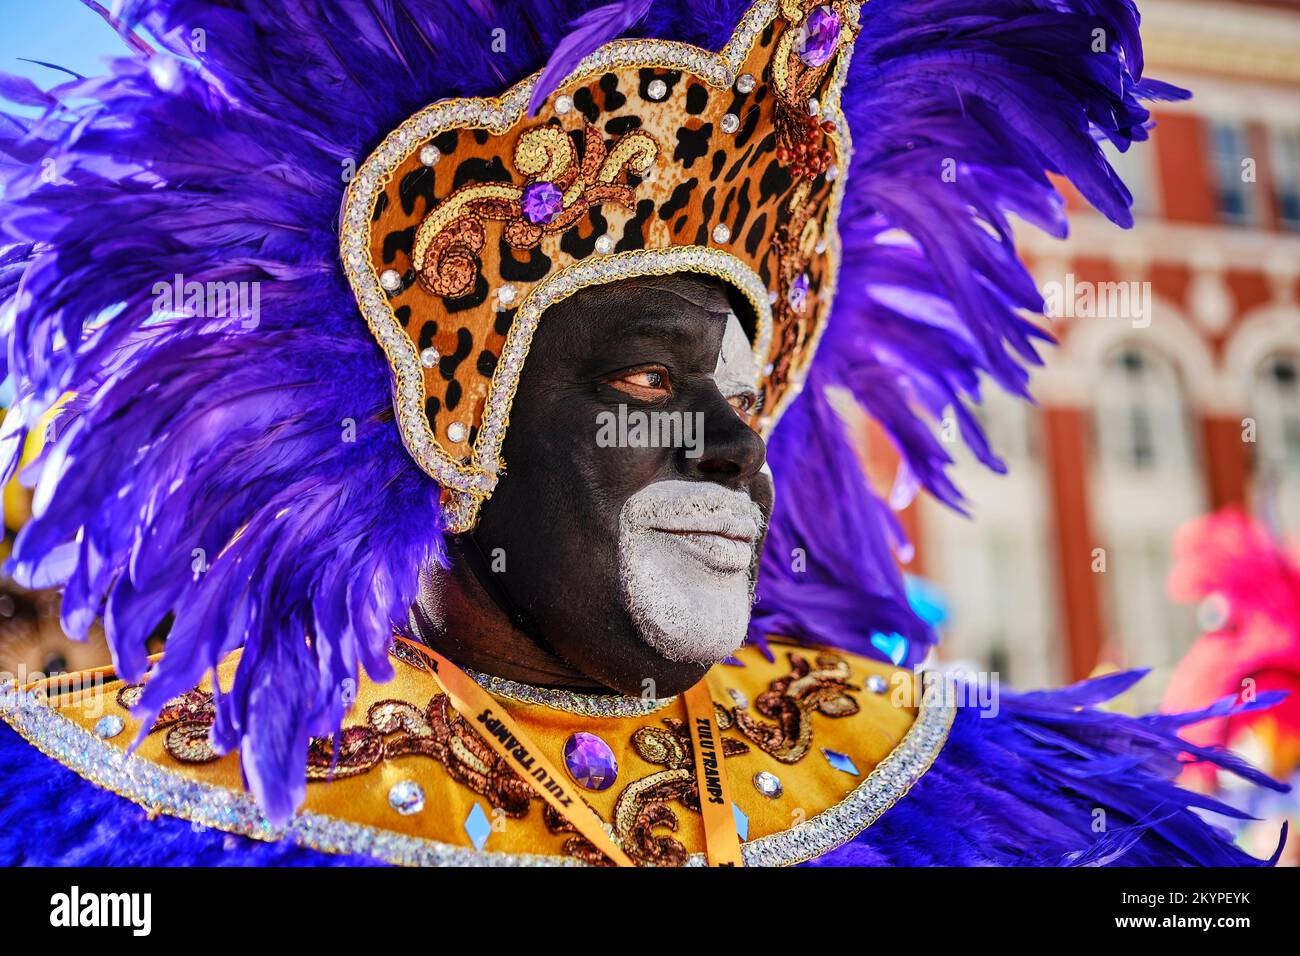 New Orleans, Louisiana, USA. 1st Mar, 2022. A member of the Zulu Social Aid and Pleasure Club Parade dances in the street as a part of Fat Tuesday Mardi Gras celebrations in New Orleans, Louisiana USA on March 01, 2022. Mardi Gras parades and festivities were cancelled in the city last year due to the Covid-19 pandemic. (Credit Image: © Dan Anderson/ZUMA Press Wire) Stock Photo